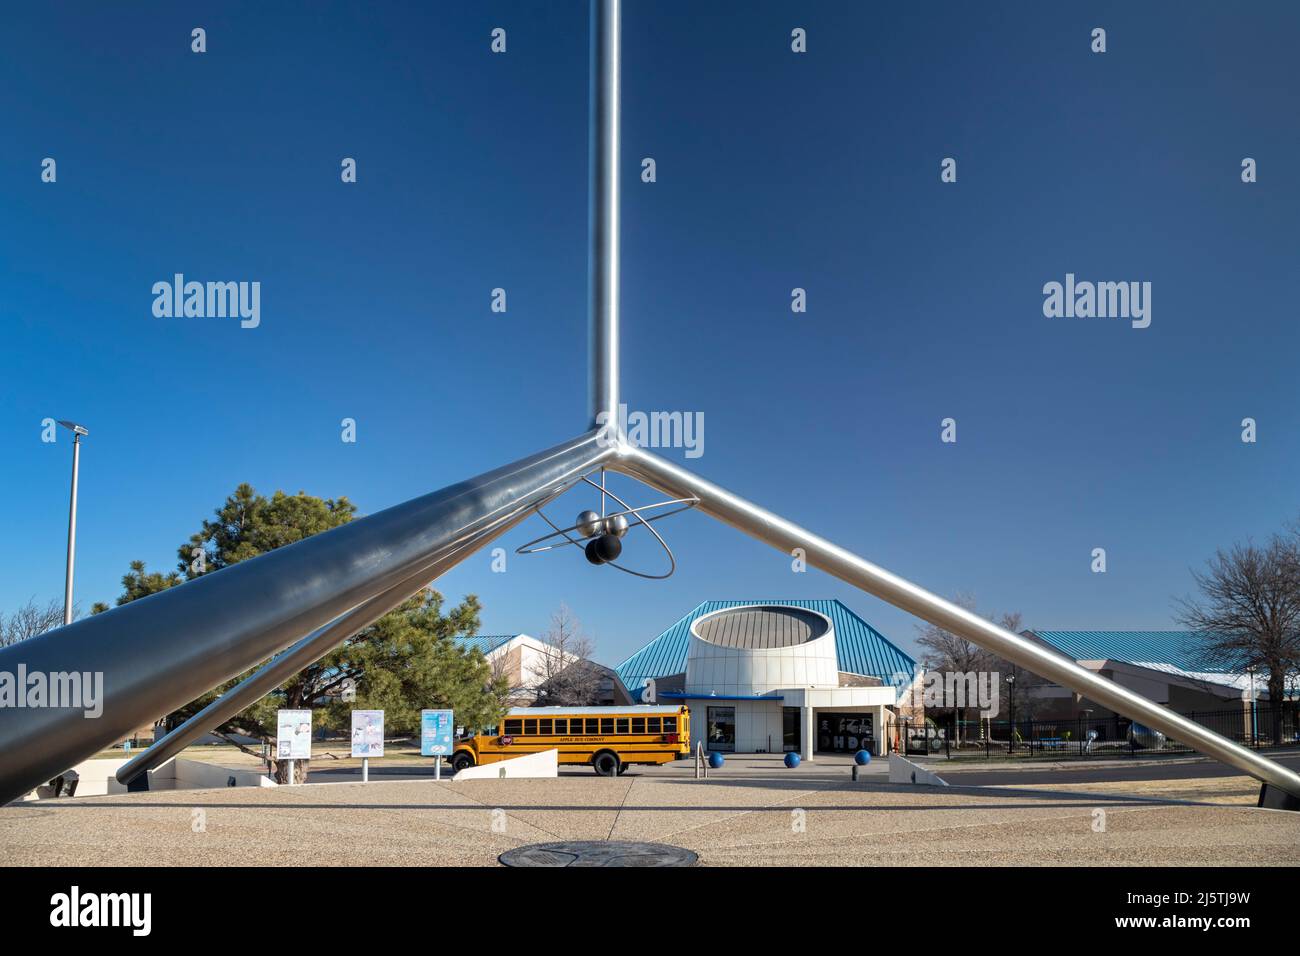 Amarillo, Texas - The Helium Monument outside the Don Harrington Discovery Center. Amarillo was the center of worldwide helium production for most of Stock Photo